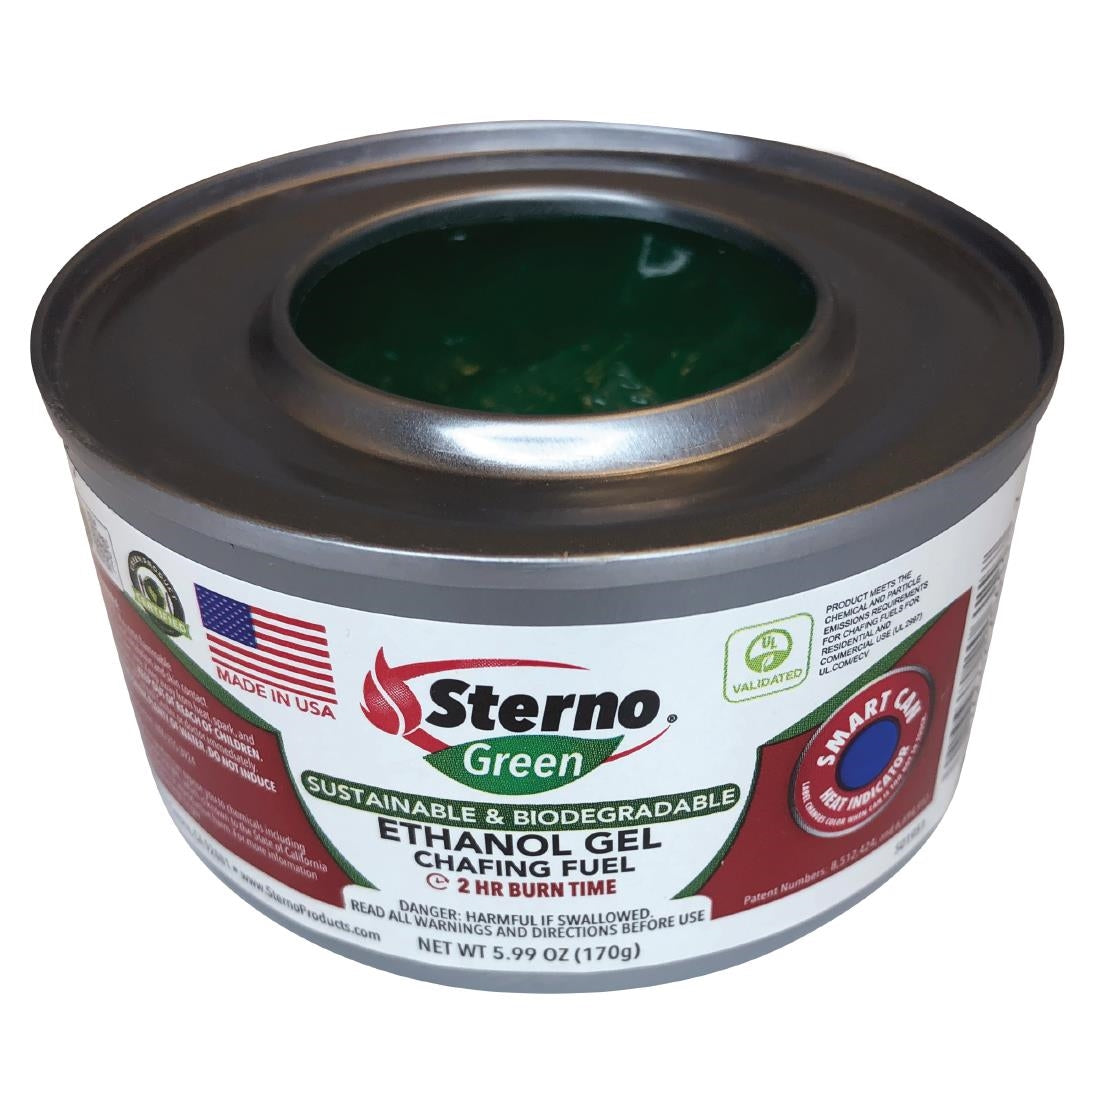 DH963 Sterno Green Ethanol Gel Chafing Fuel 2 Hour (Pack of 12) JD Catering Equipment Solutions Ltd